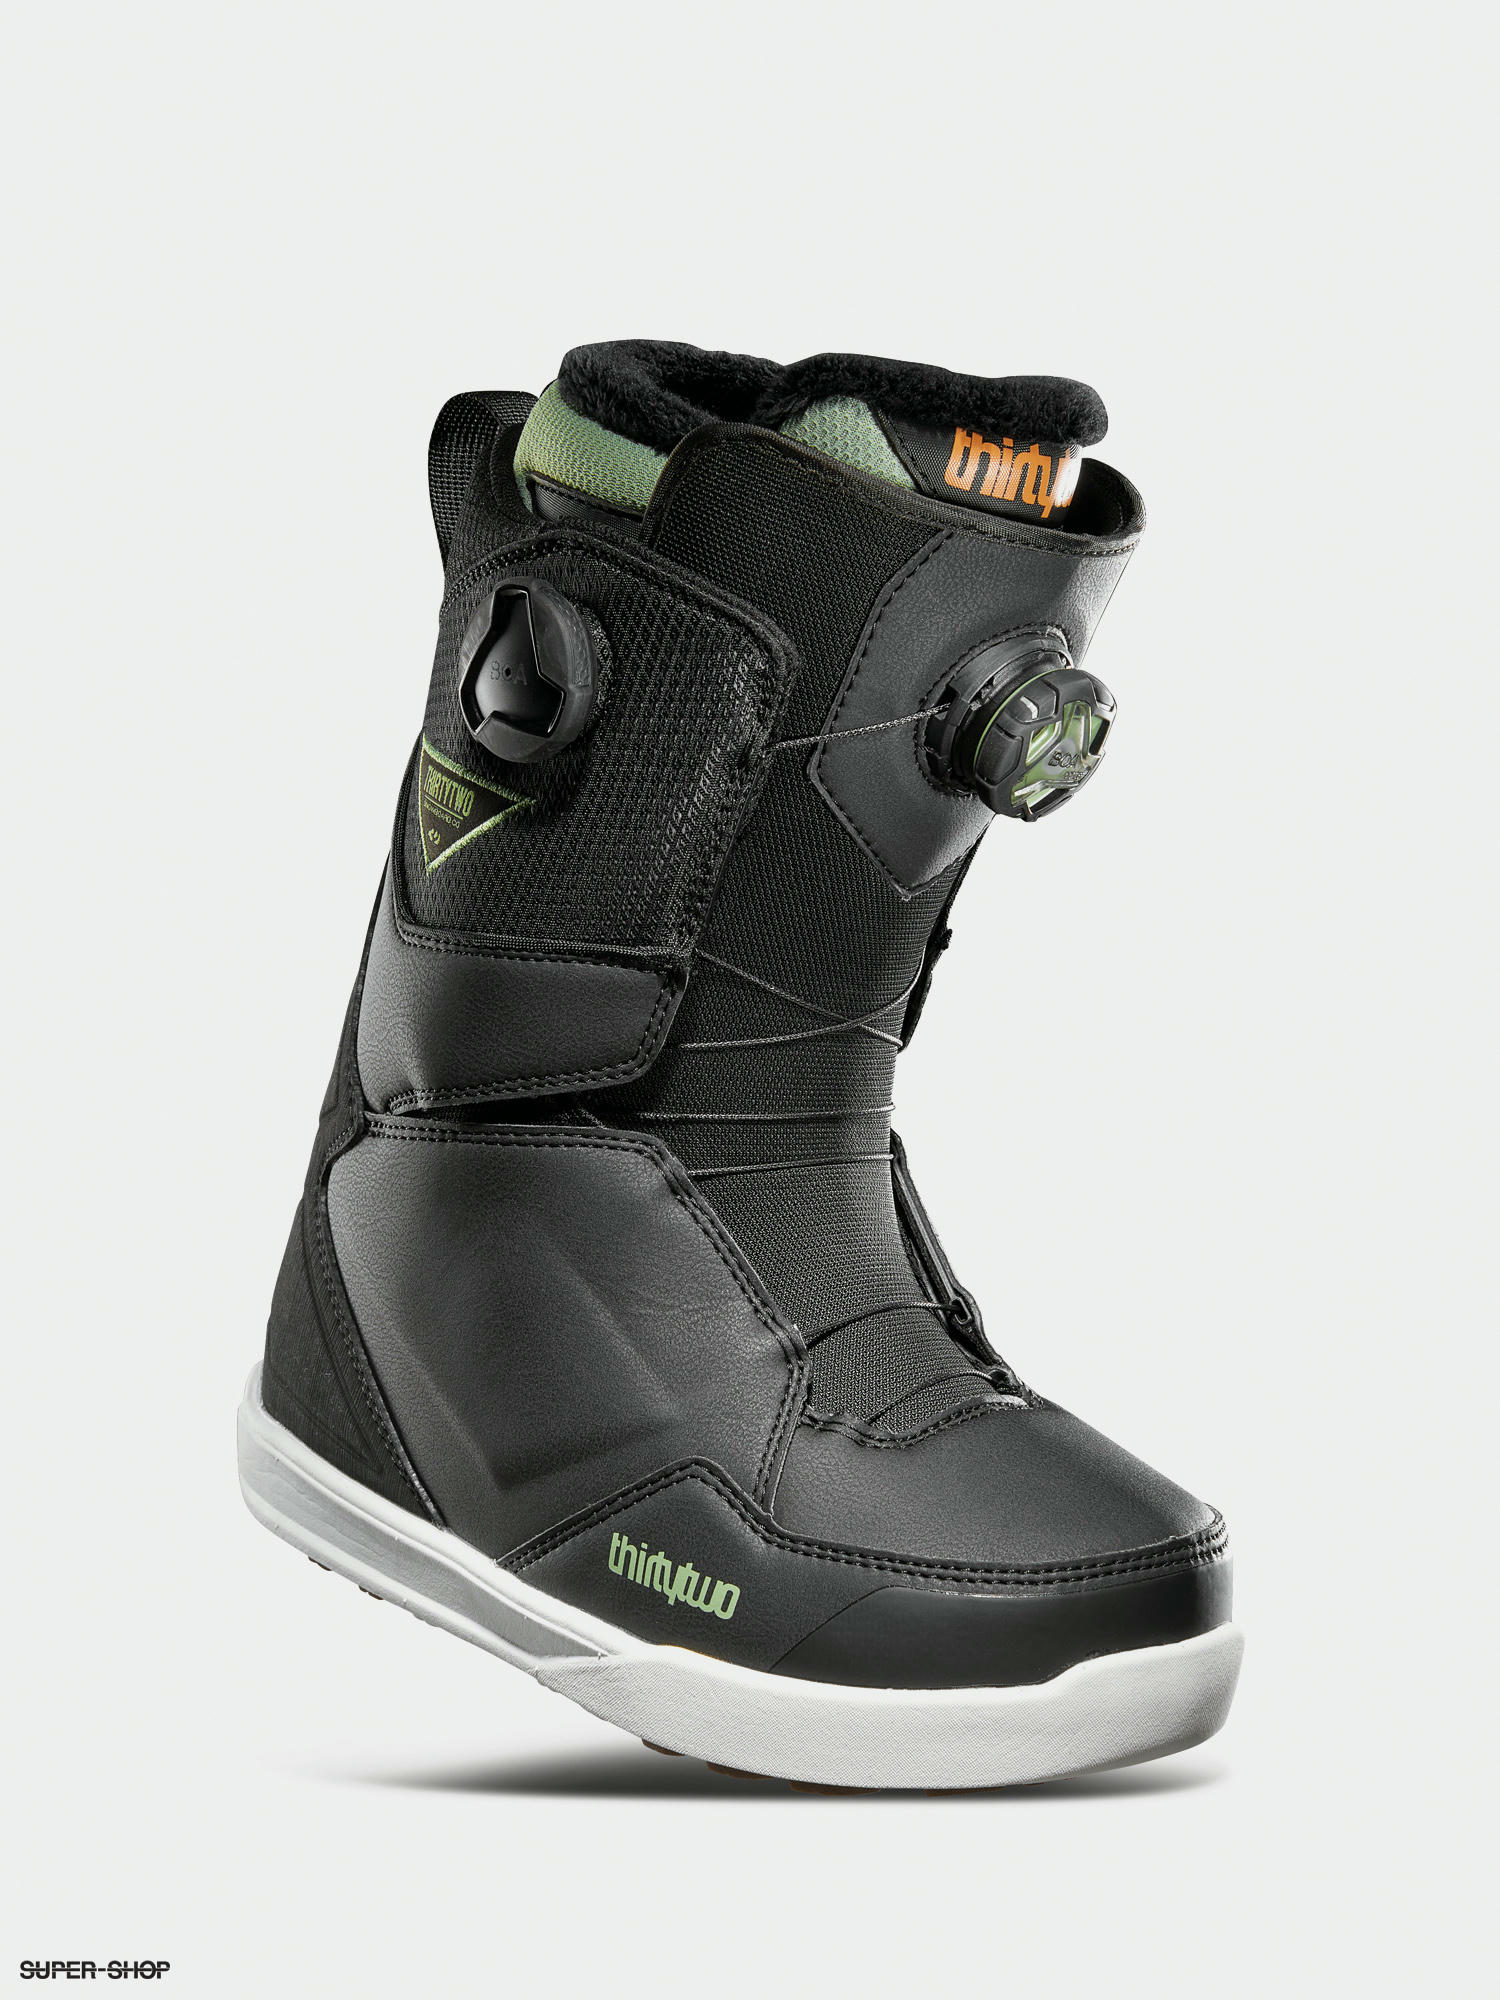 ThirtyTwo Lashed Double Boa 18 Snowboard Boots 